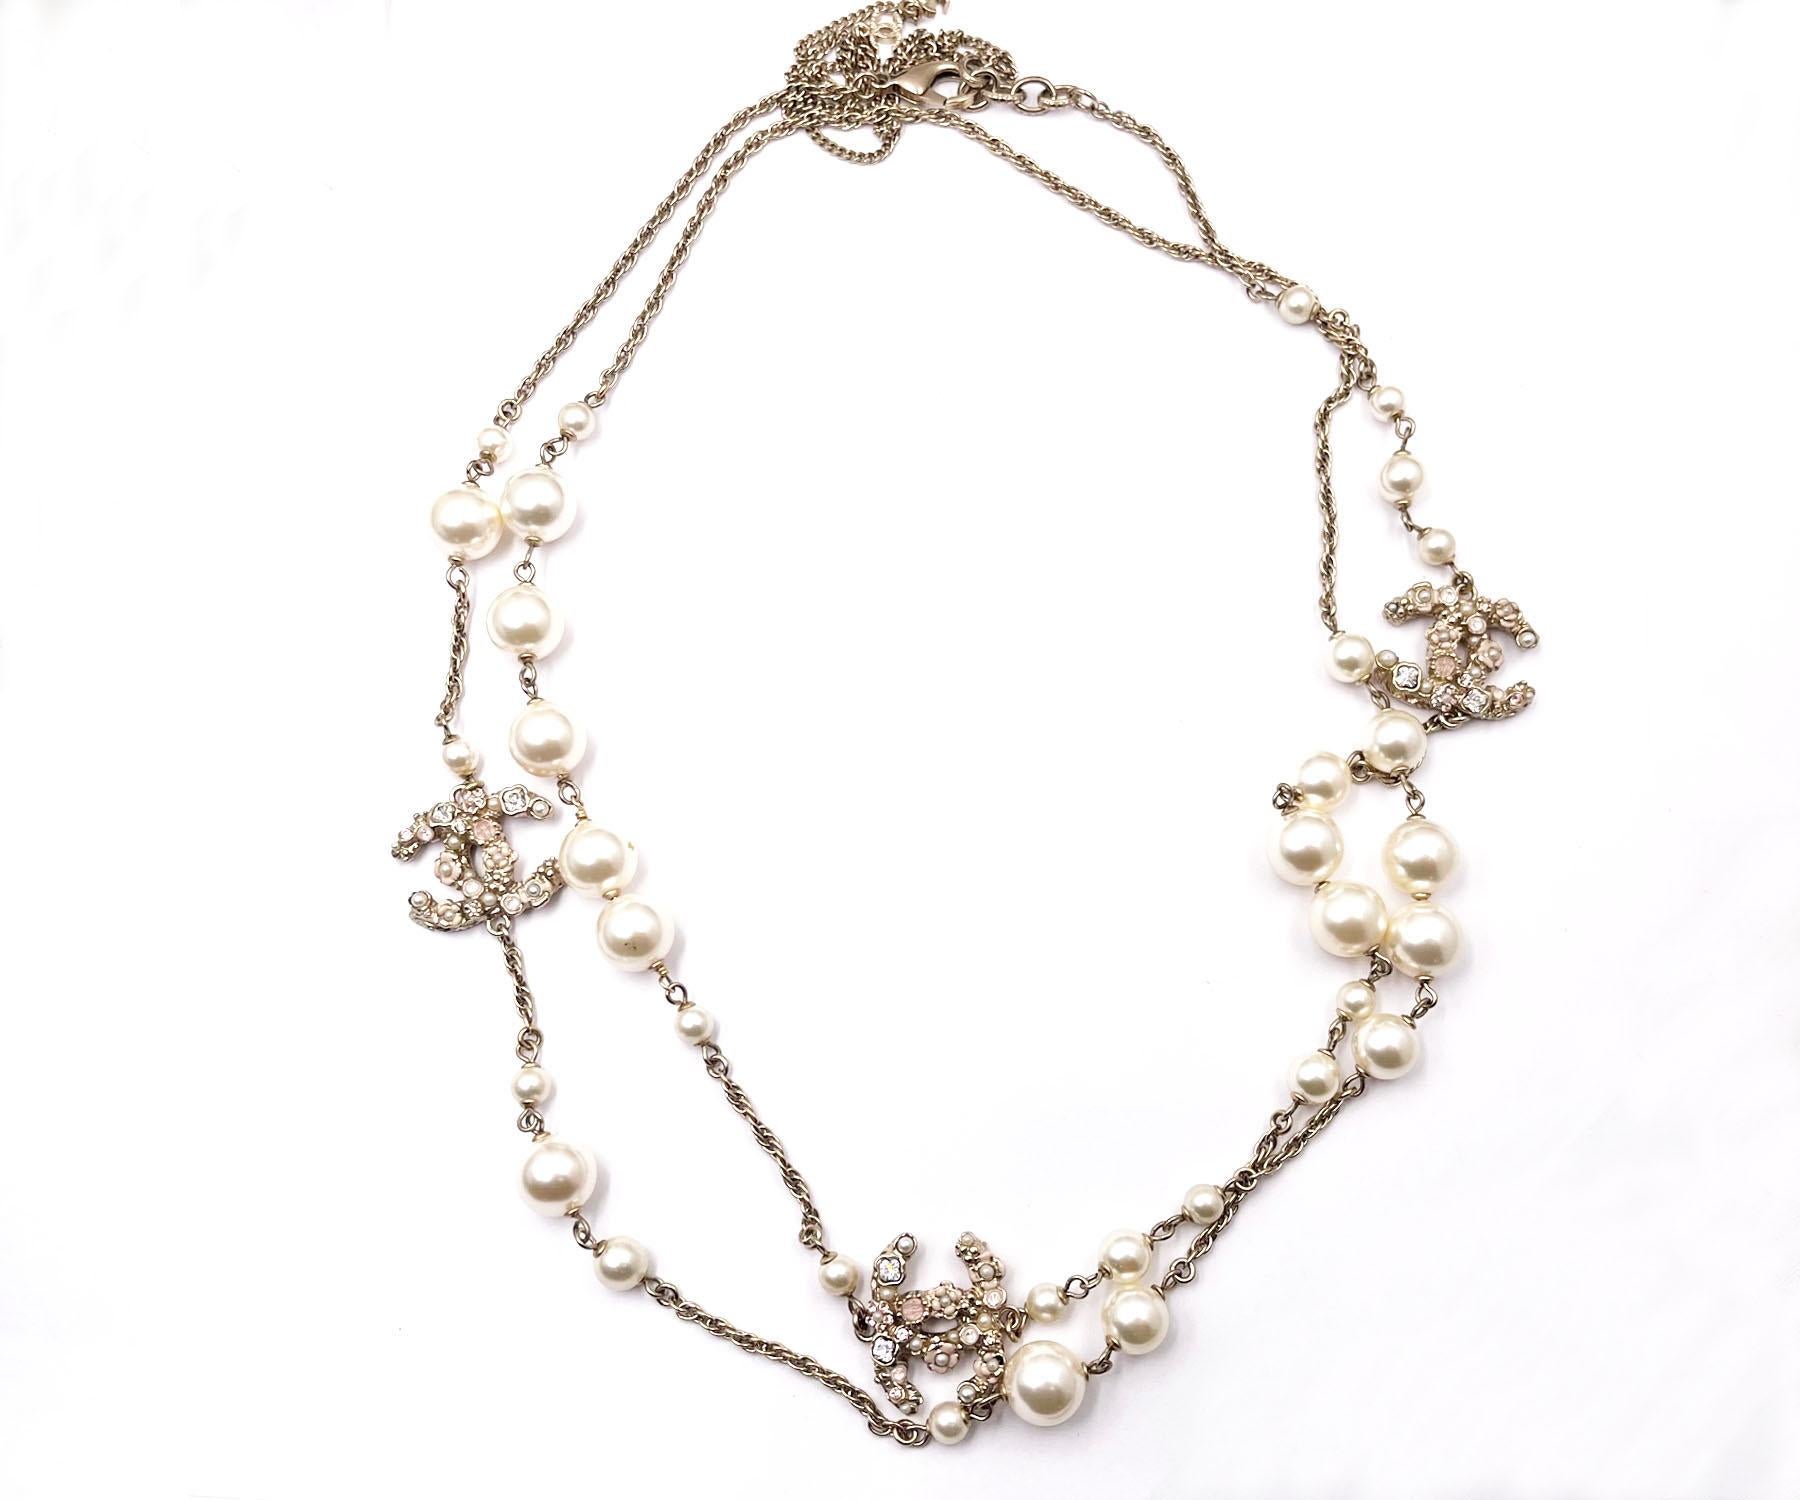 Chanel gold CC Pastel Flower Crystal Pearl Long Necklace

*Marked 11
*Made in Italy

-It is approximately  43